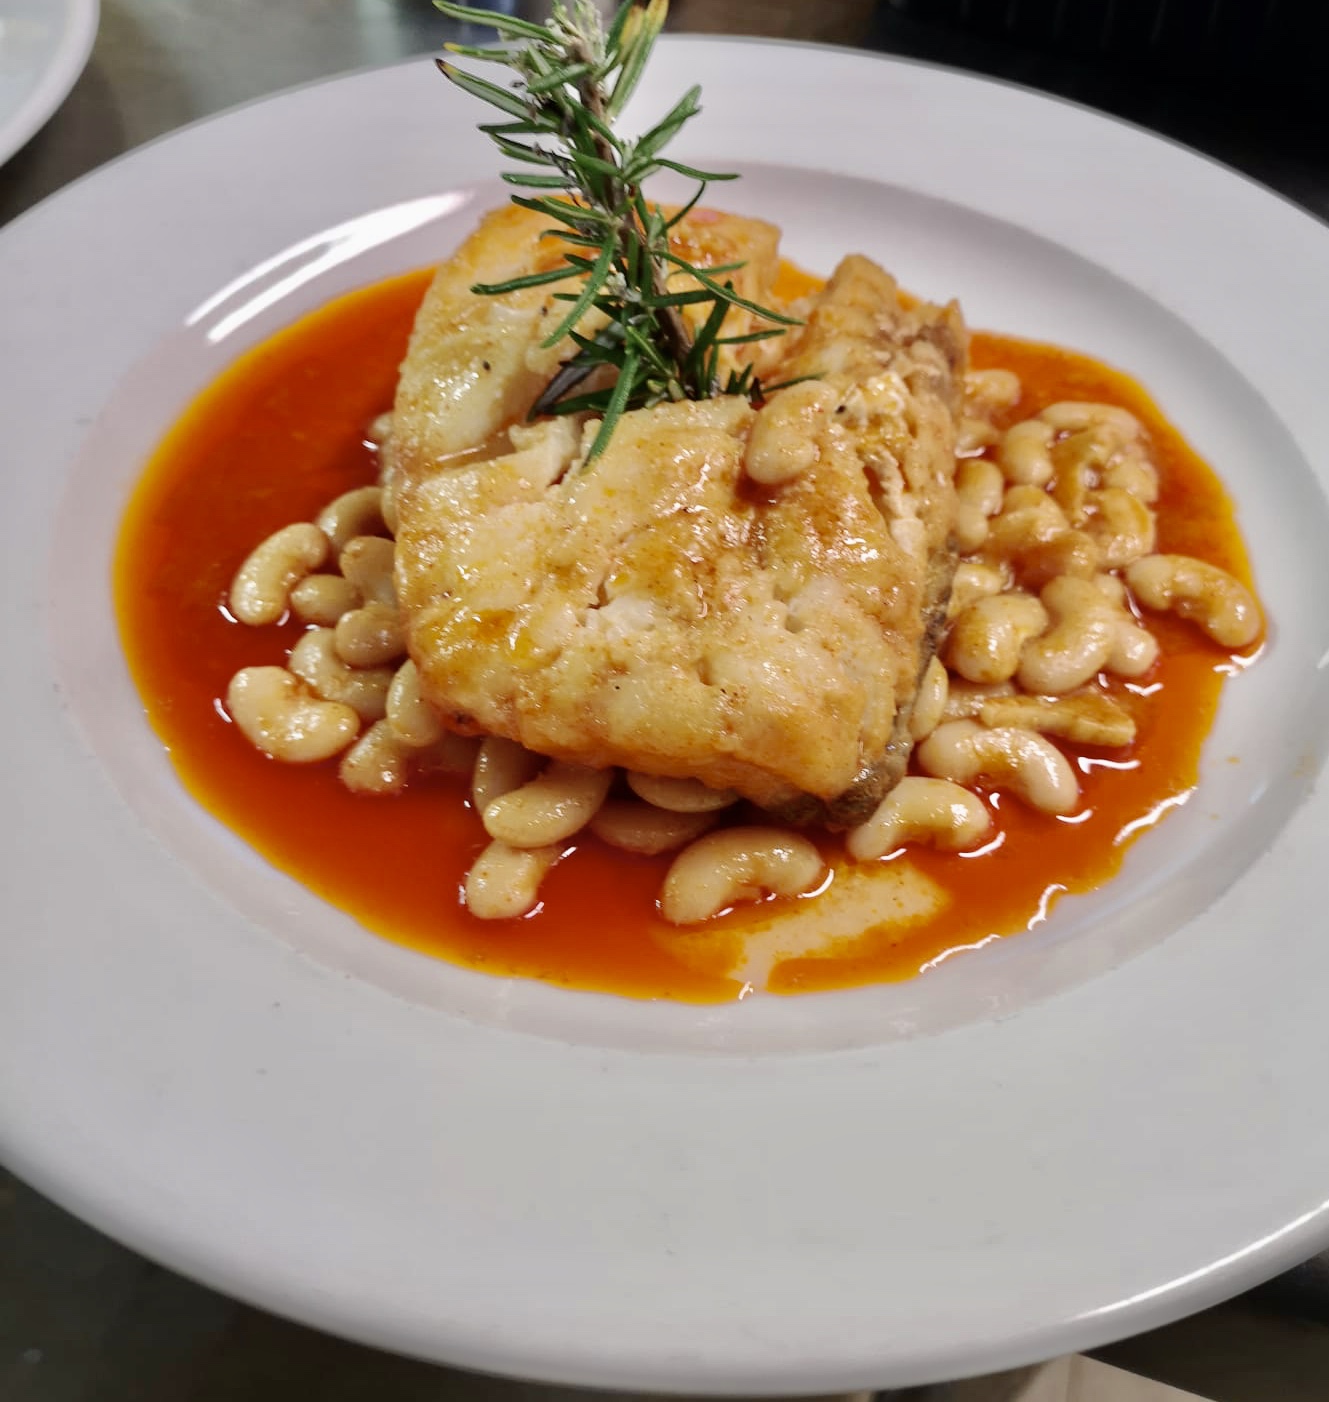 COD WITH BEANS GANXET